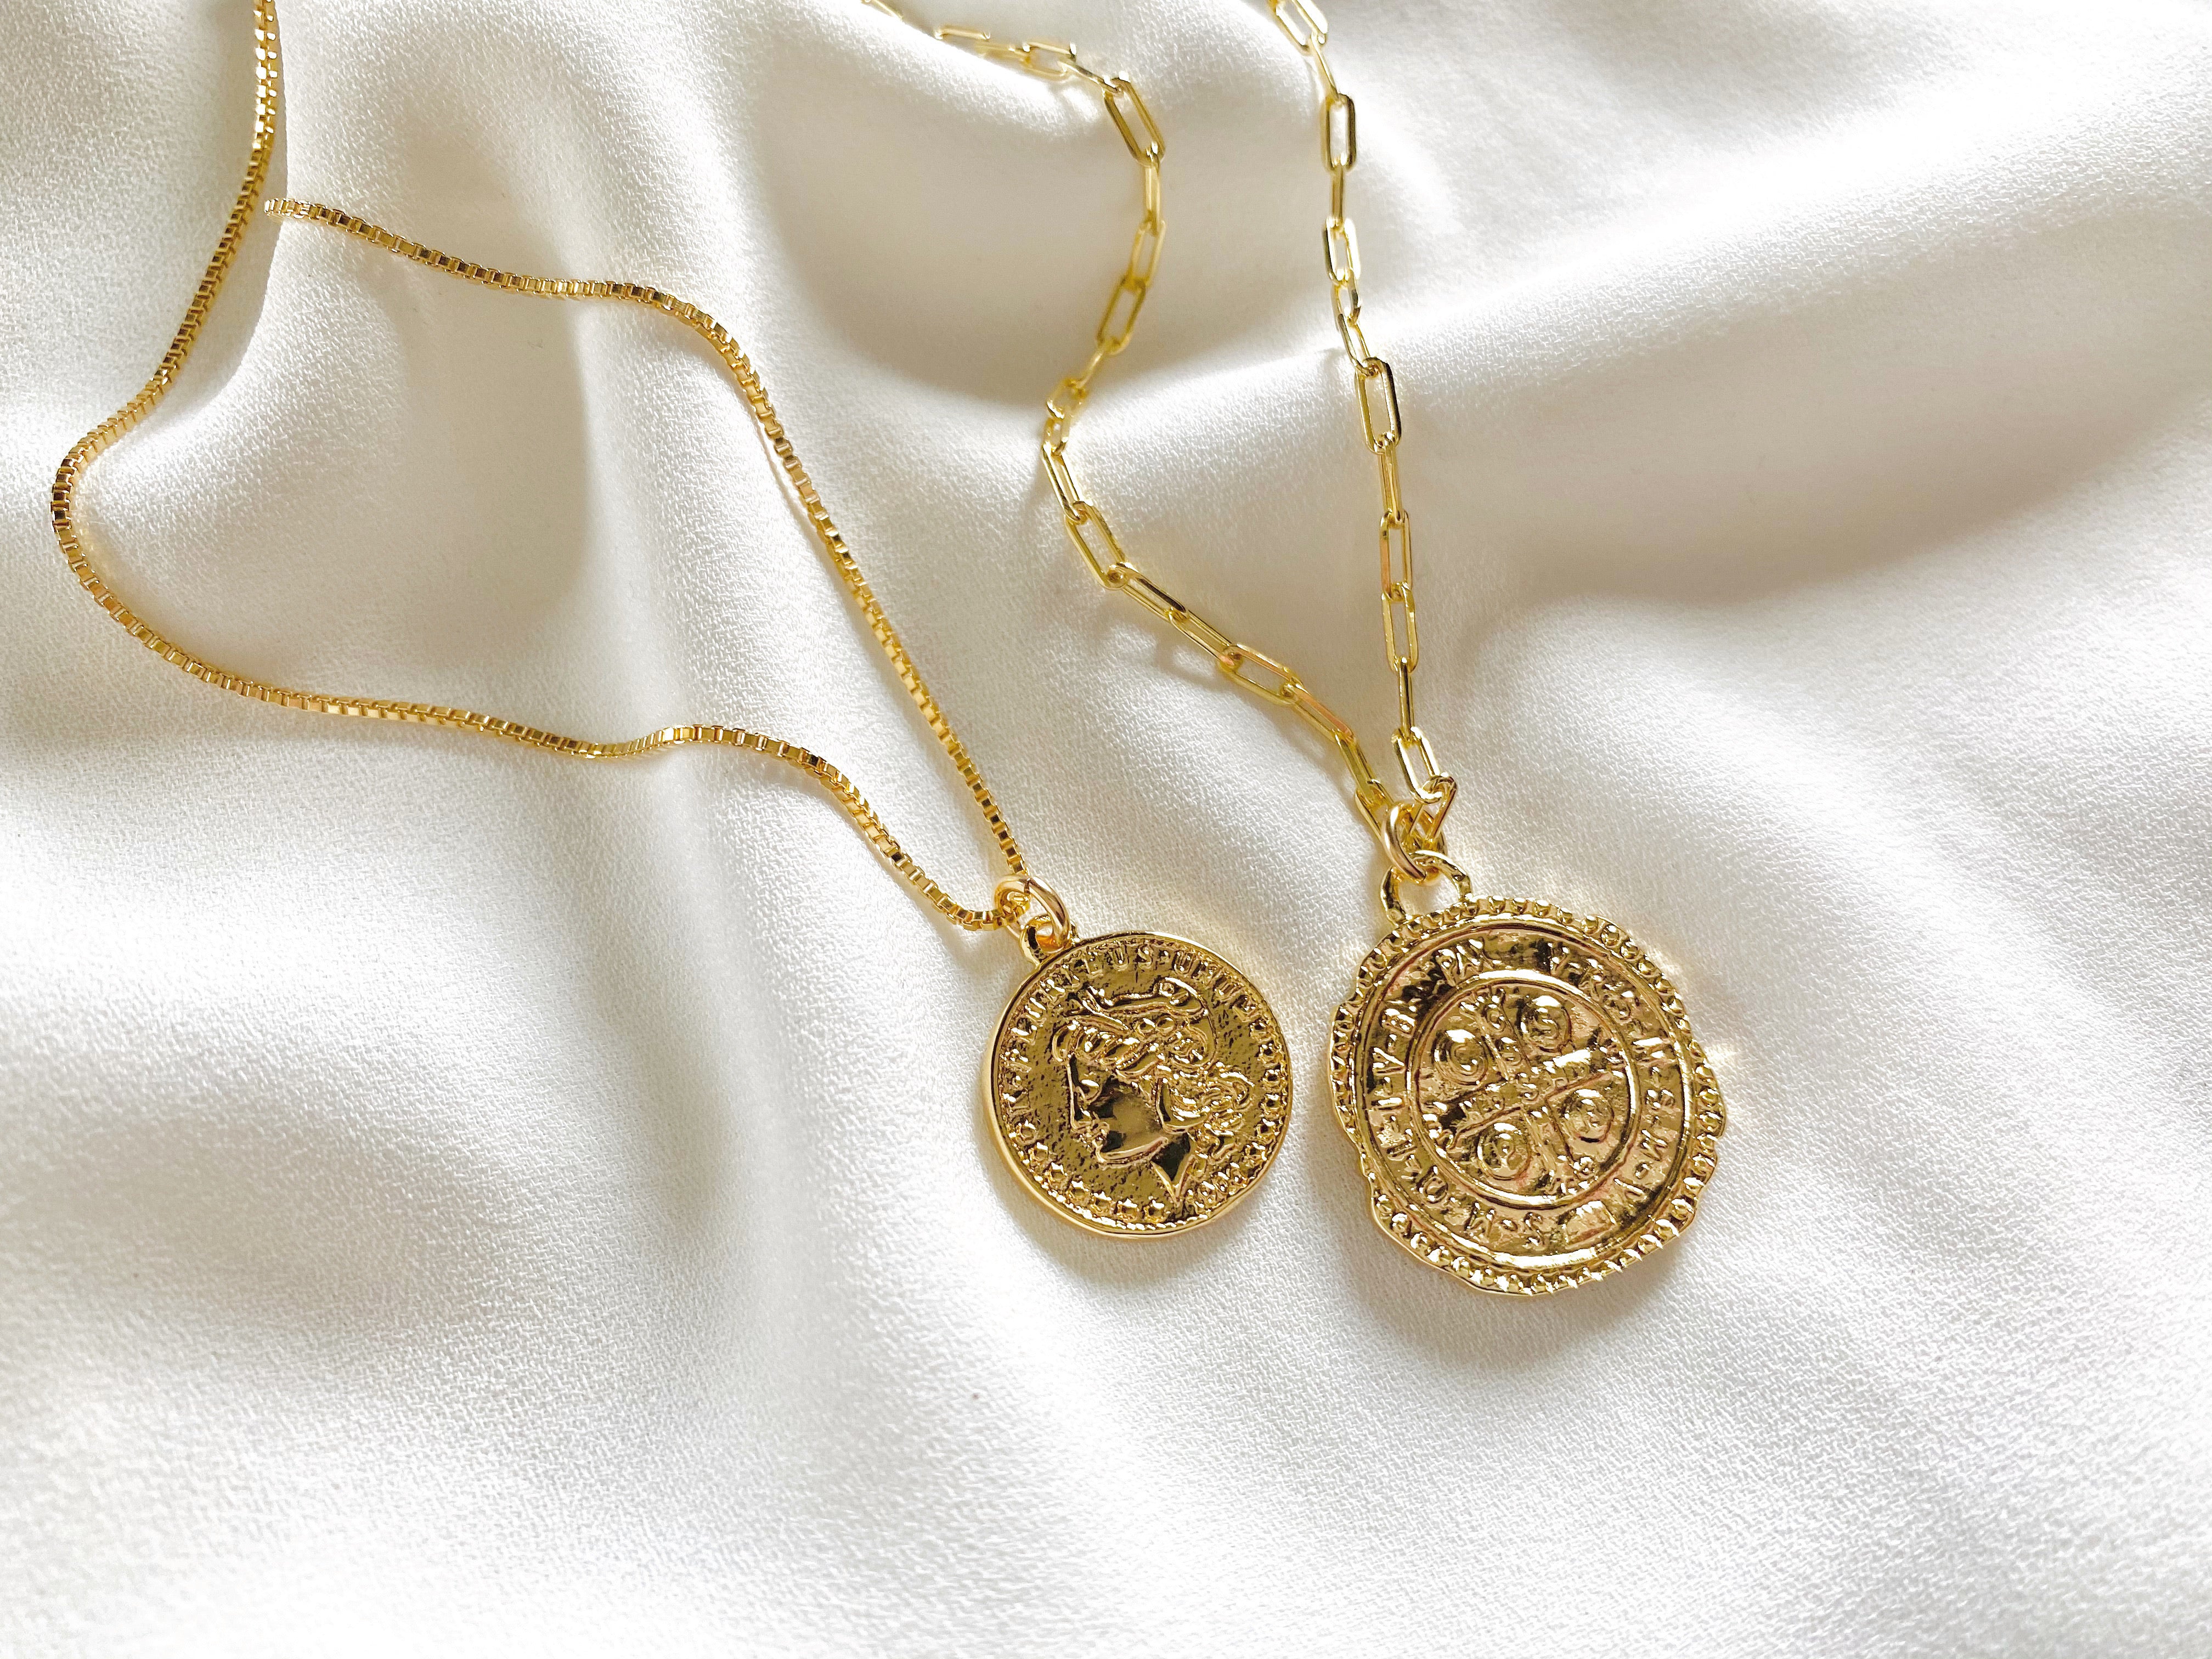 Gold Filled Medallion Necklaces - Athena - Cross Coin - Compass Necklace